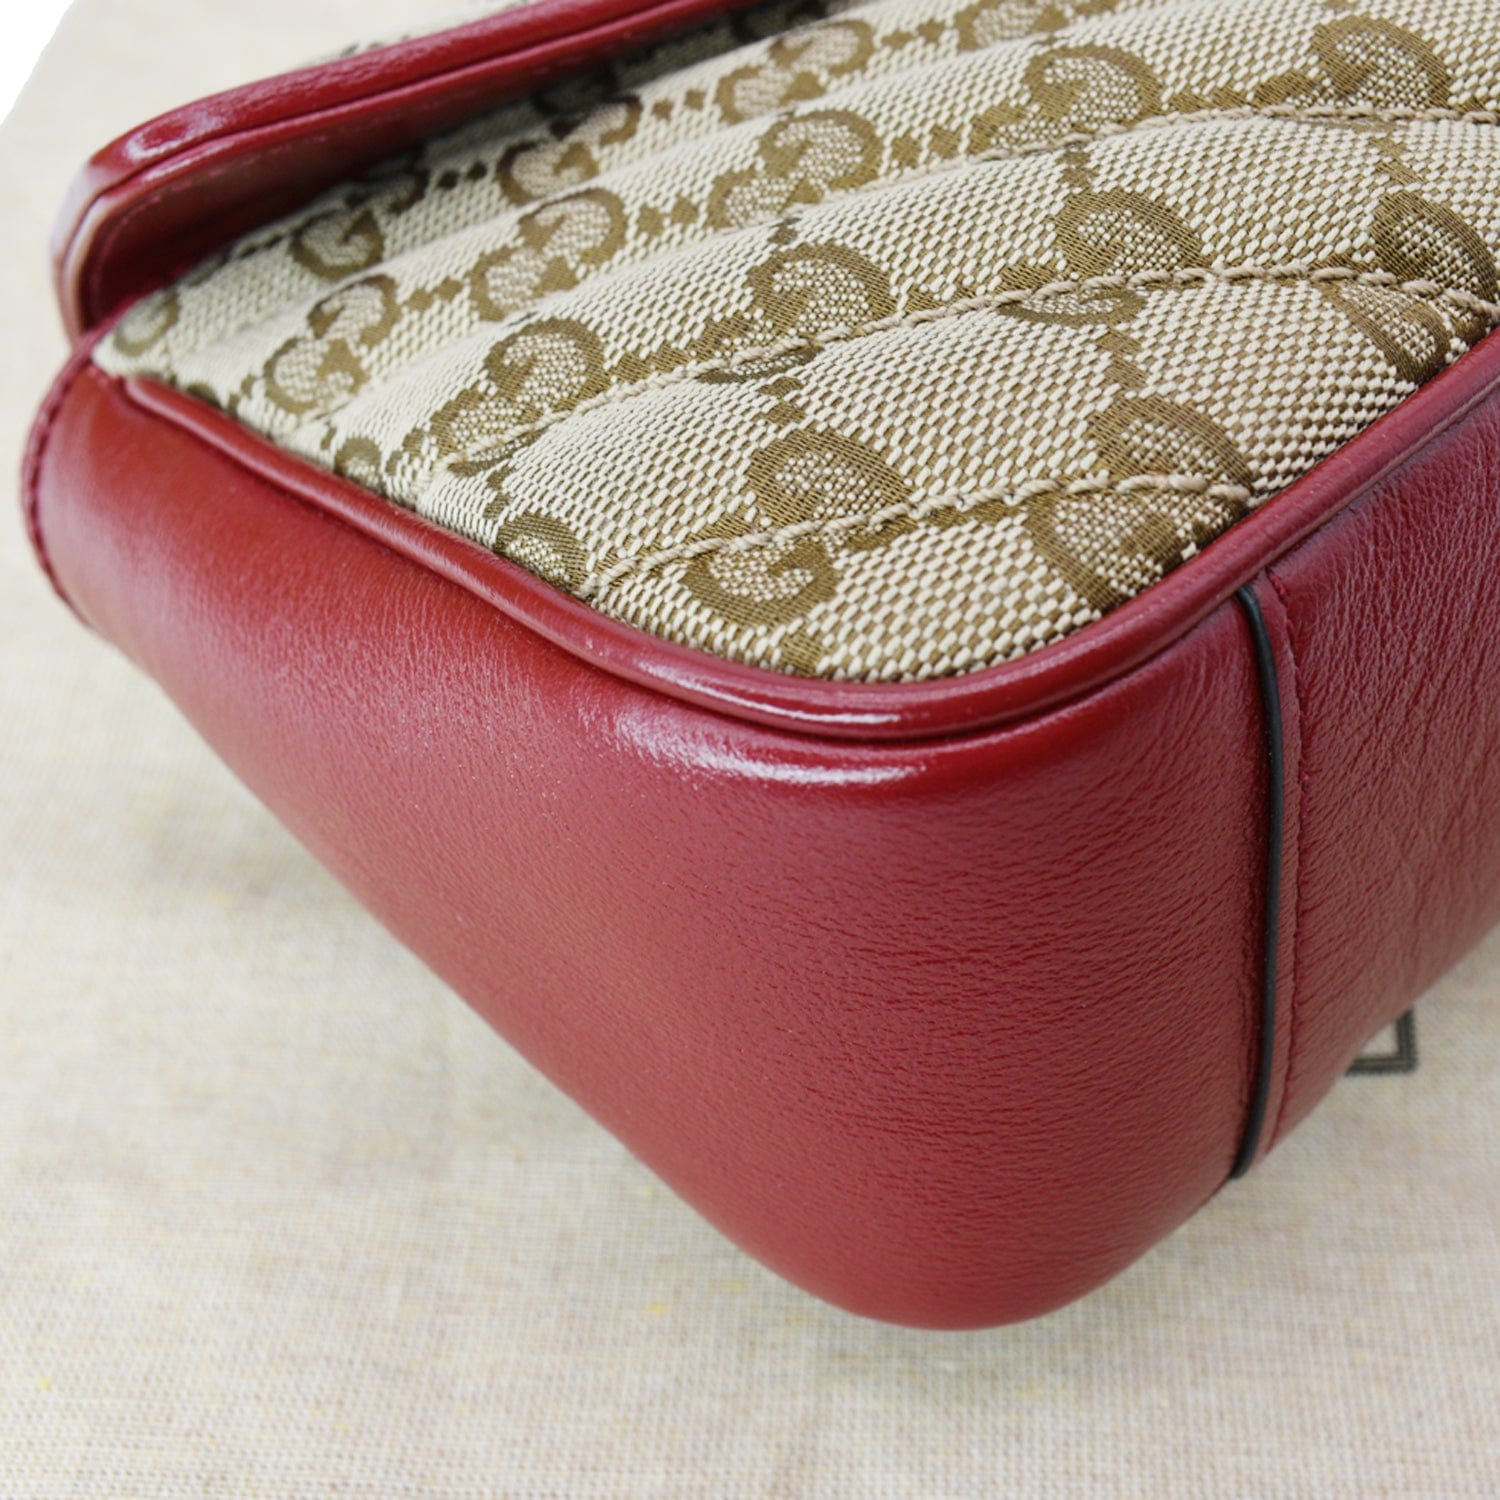 Gucci: Red & Beige GG Marmont Bag